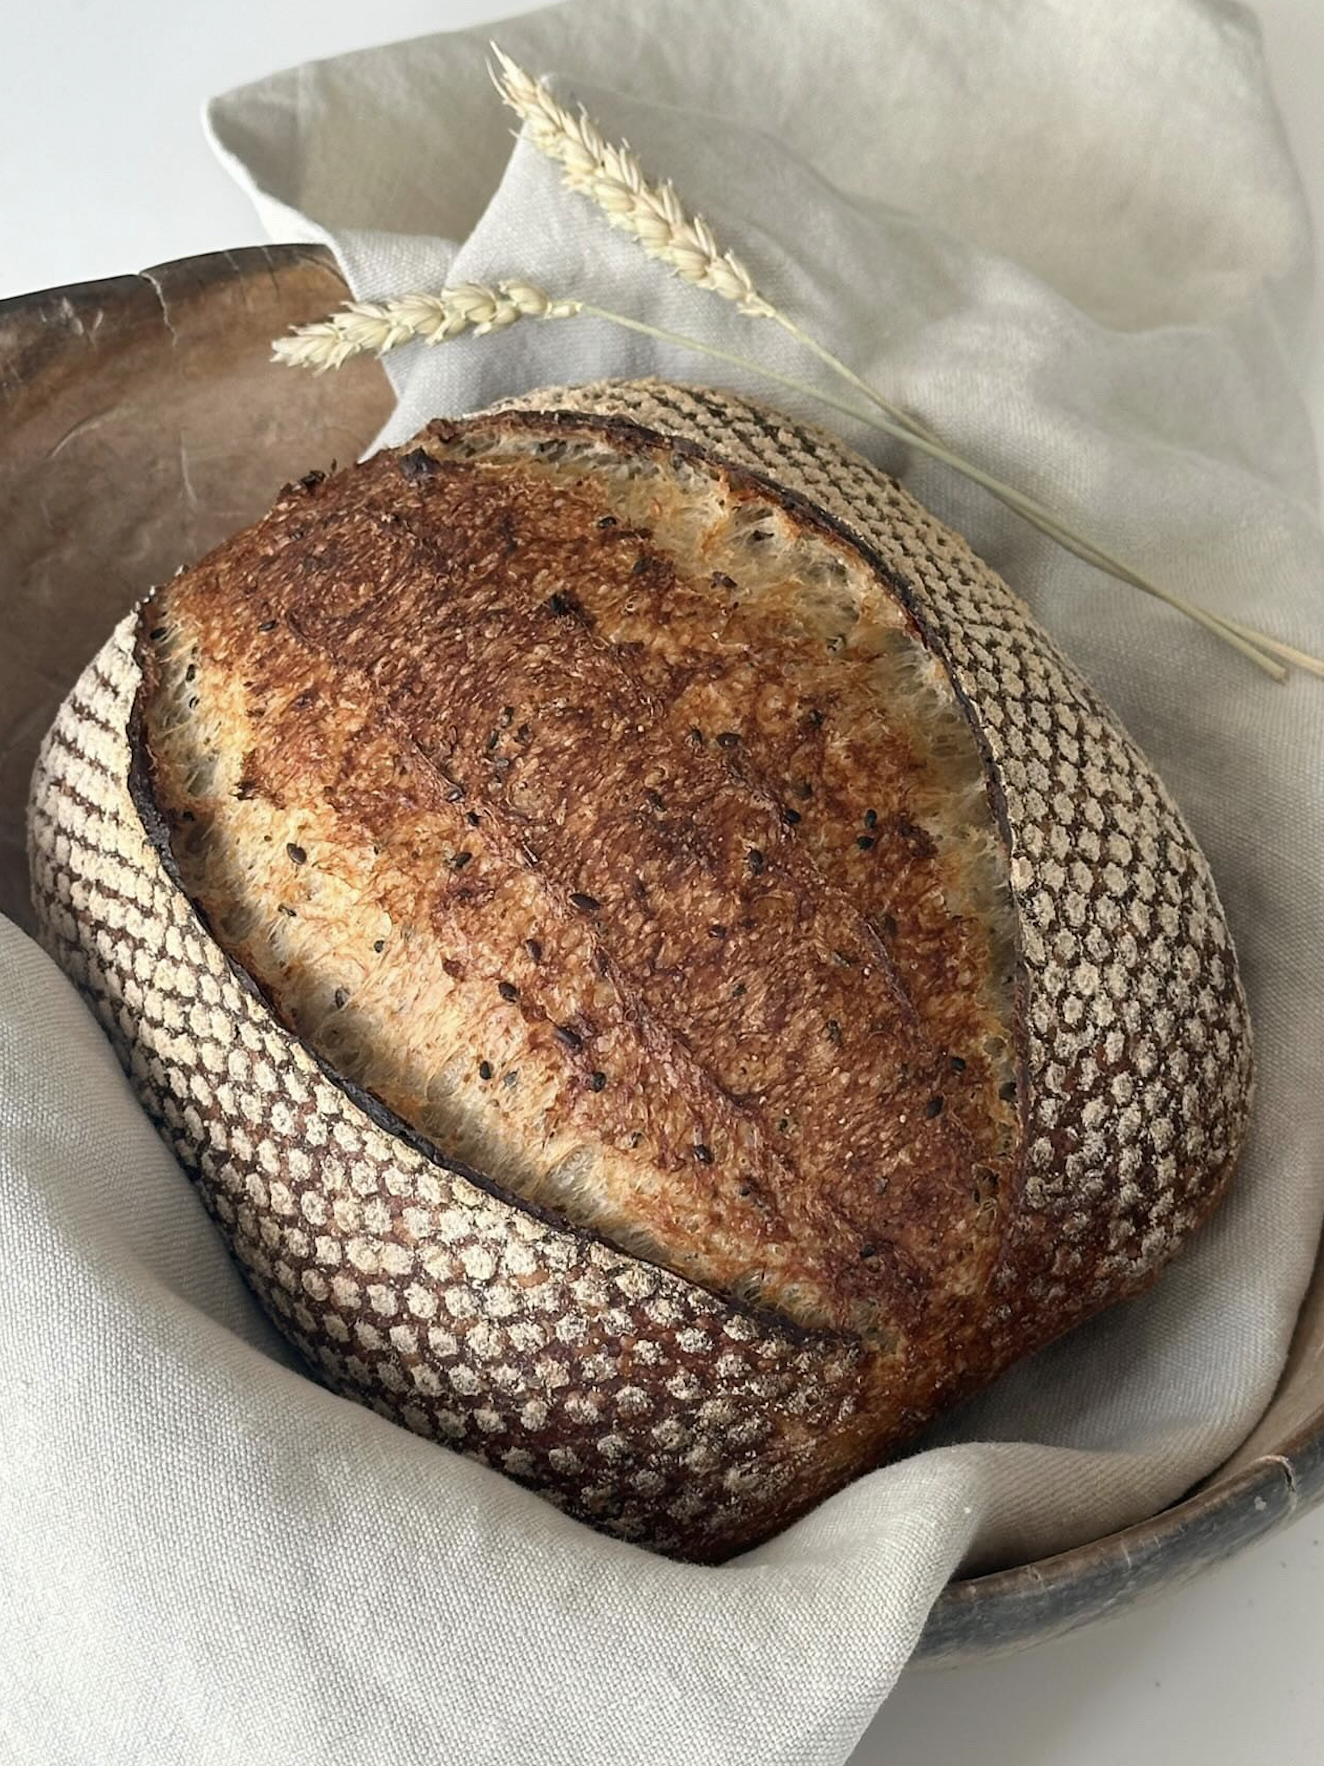 a sourdough bread influencer home baker classes teaching recipes trouble shooting help support in England United Kingdom from Marie Lester of @MarieLesterBaker on Instagram 3